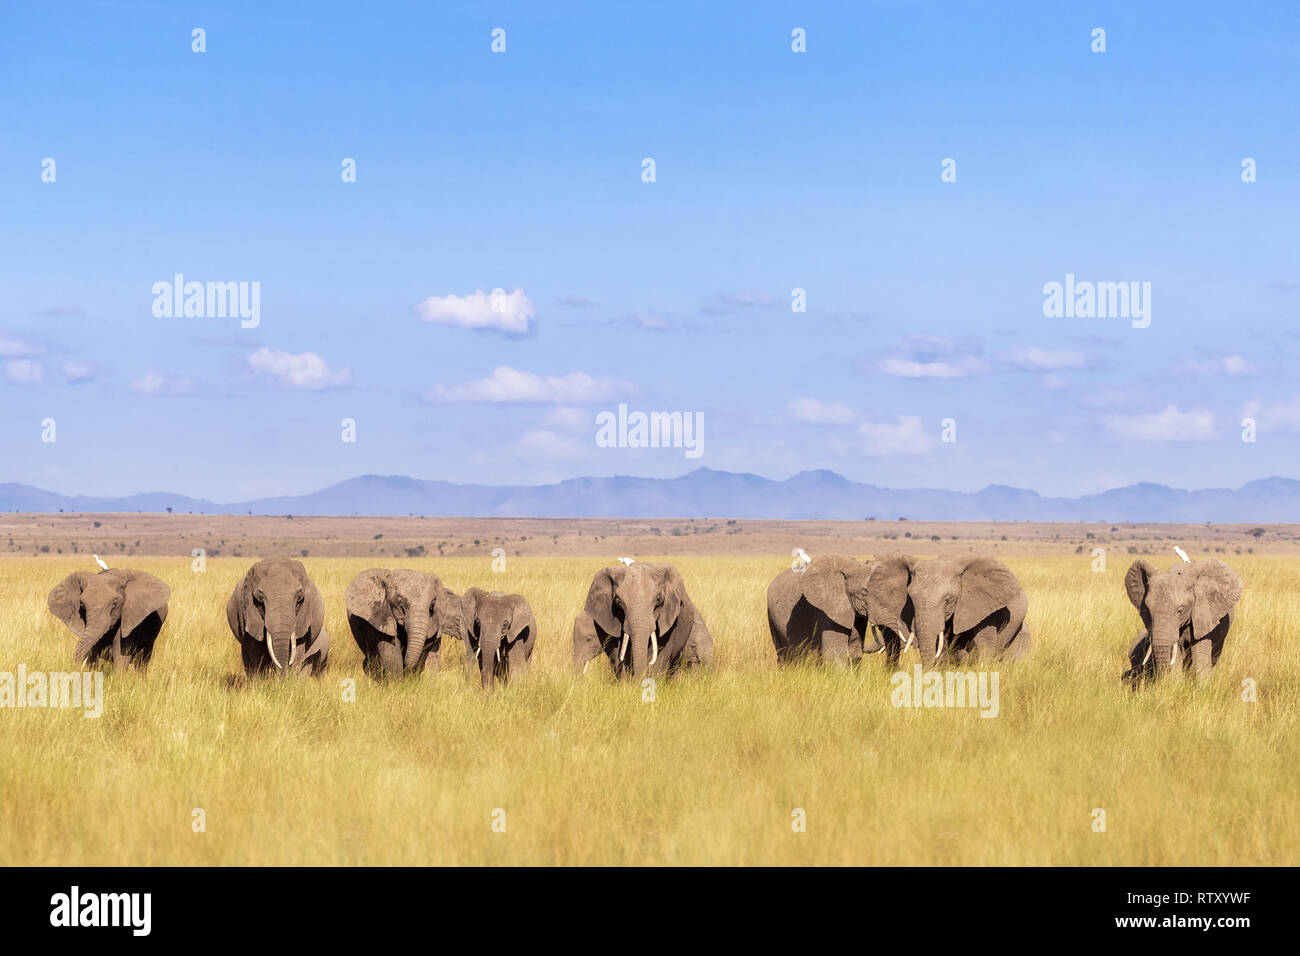 A herd of elephants walk through Amboseli National Park, Kenya. This family group  is against a backdrop of the foothills of Mt Kilimanjaro and blue s Stock Photo